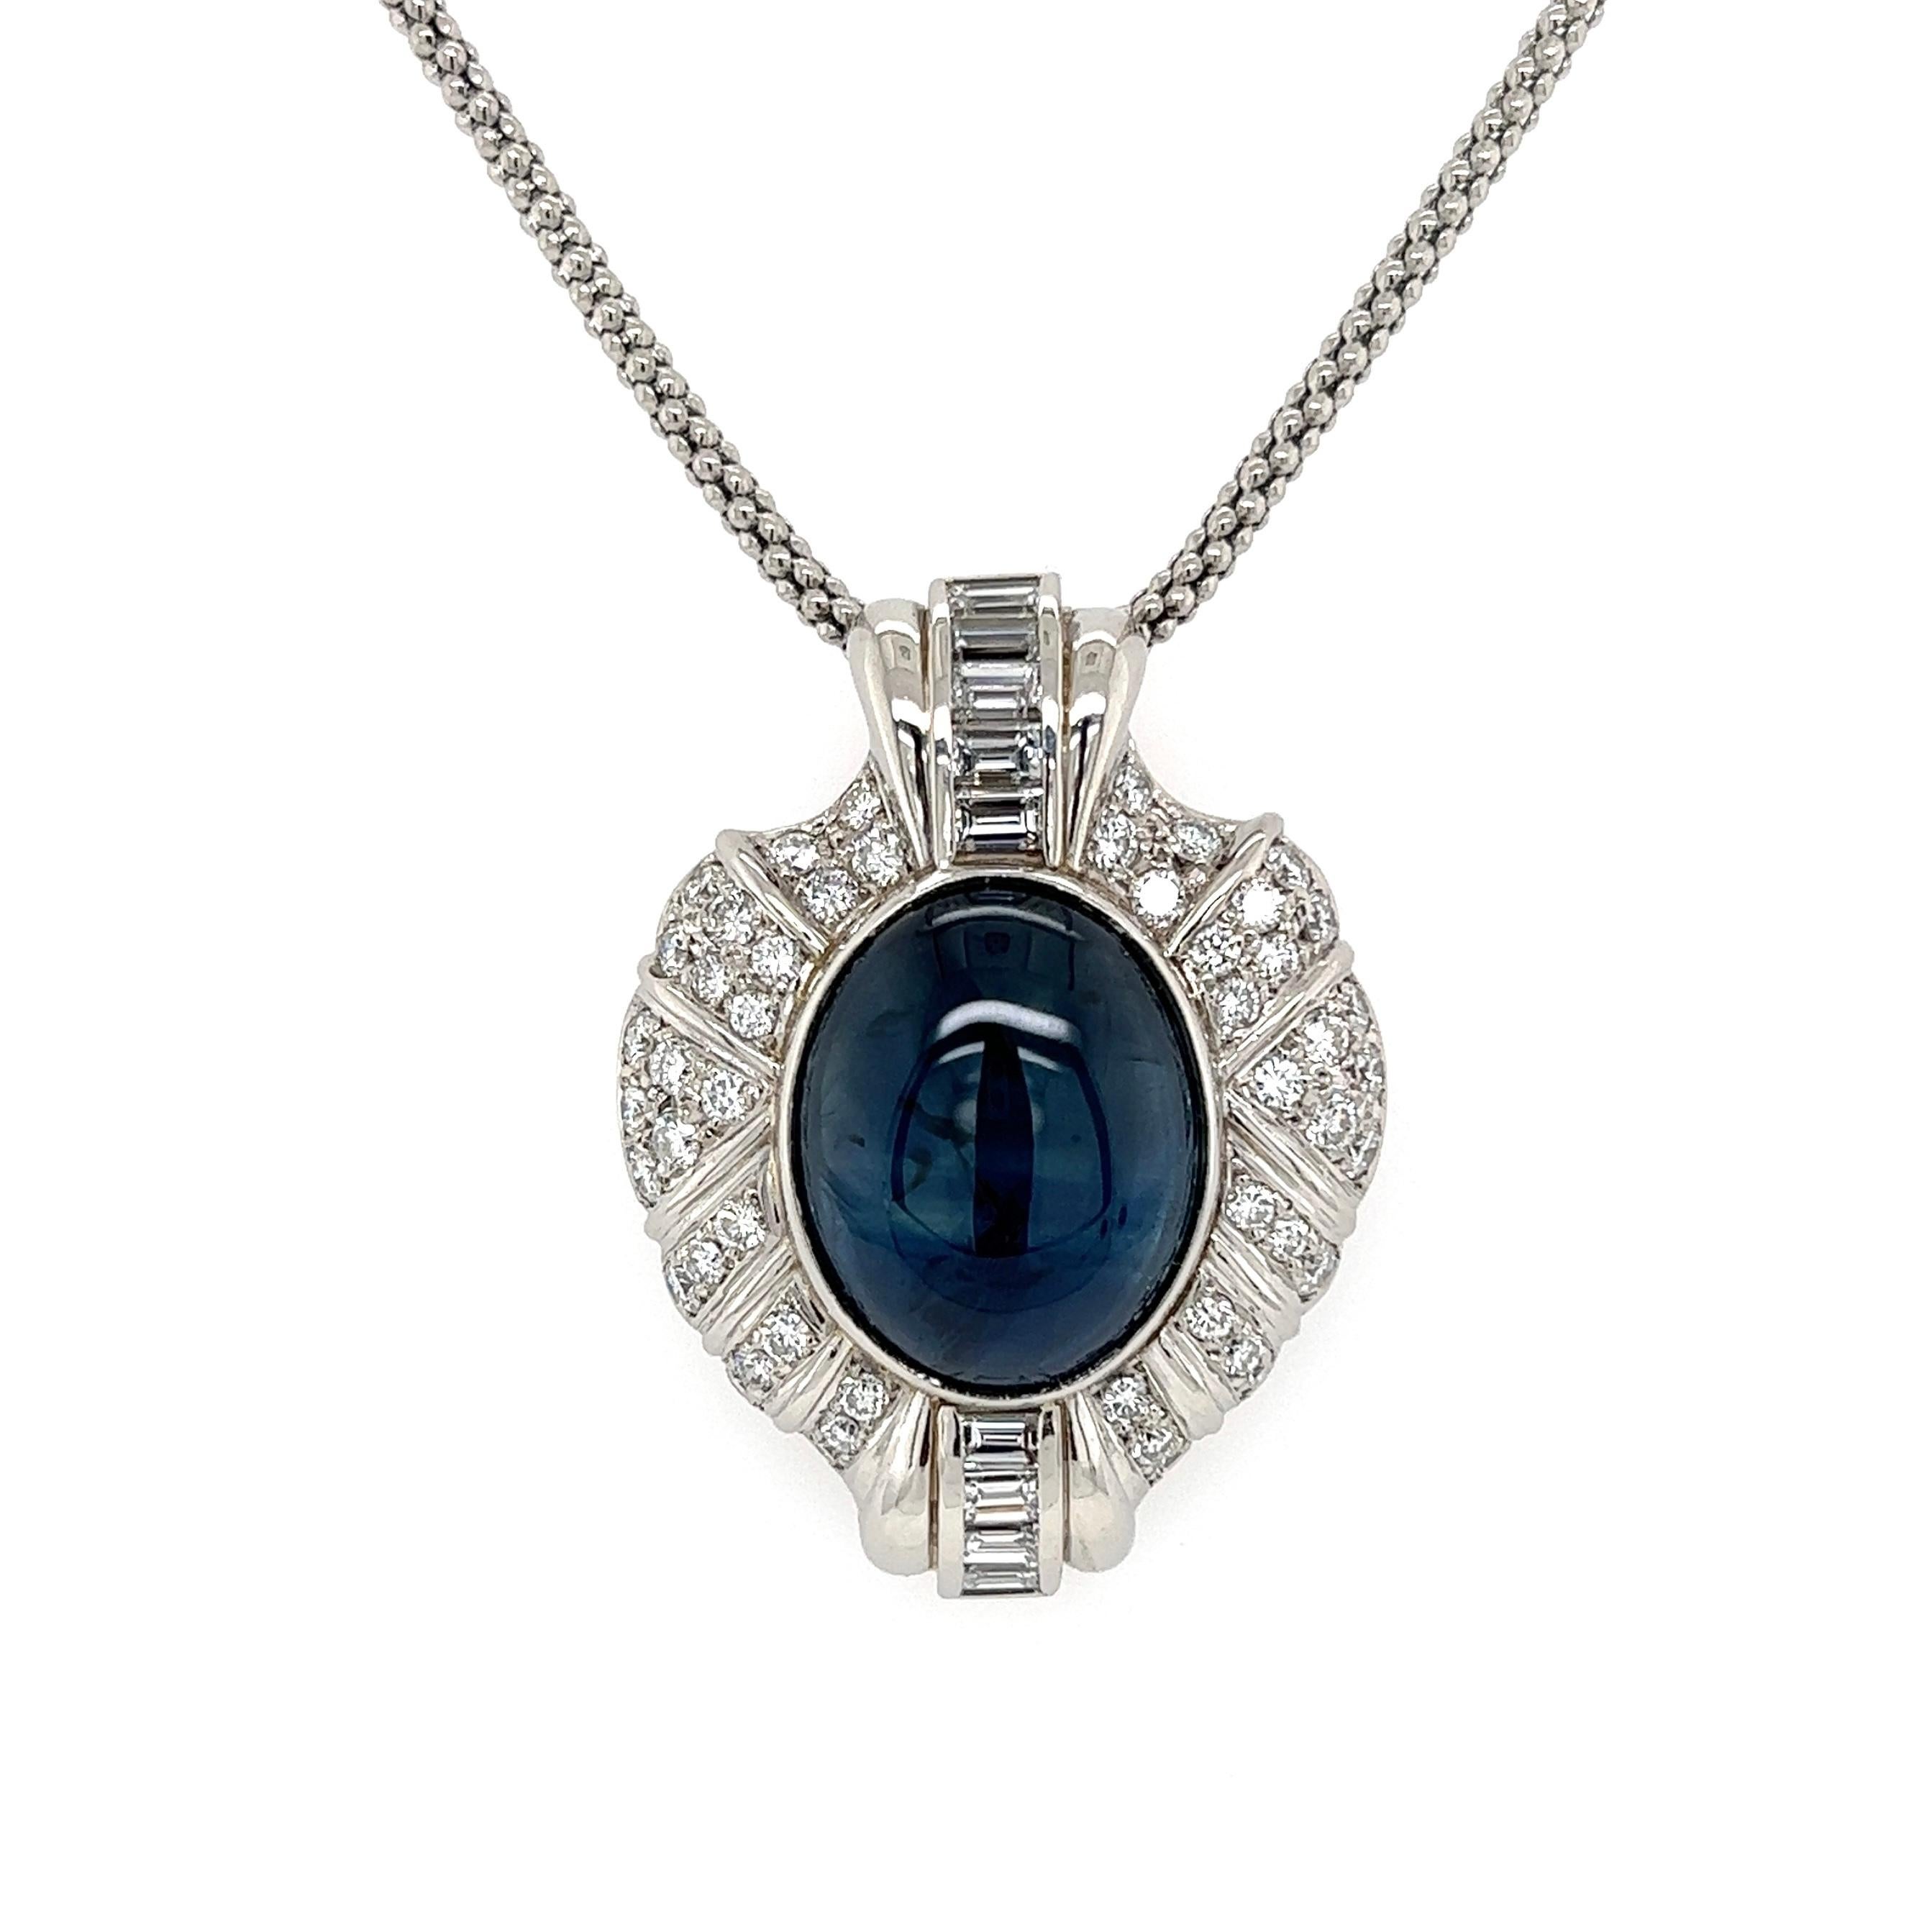 Simply Beautiful! Elegant and finely detailed Sapphire and Diamond Pendant Necklace, suspended from a 20” long Chain. Center of Pendant, securely Hand set with a Cabochon Sapphire, weighing approx. 18.35 Carats. GIA # 6214805116. Surrounded by